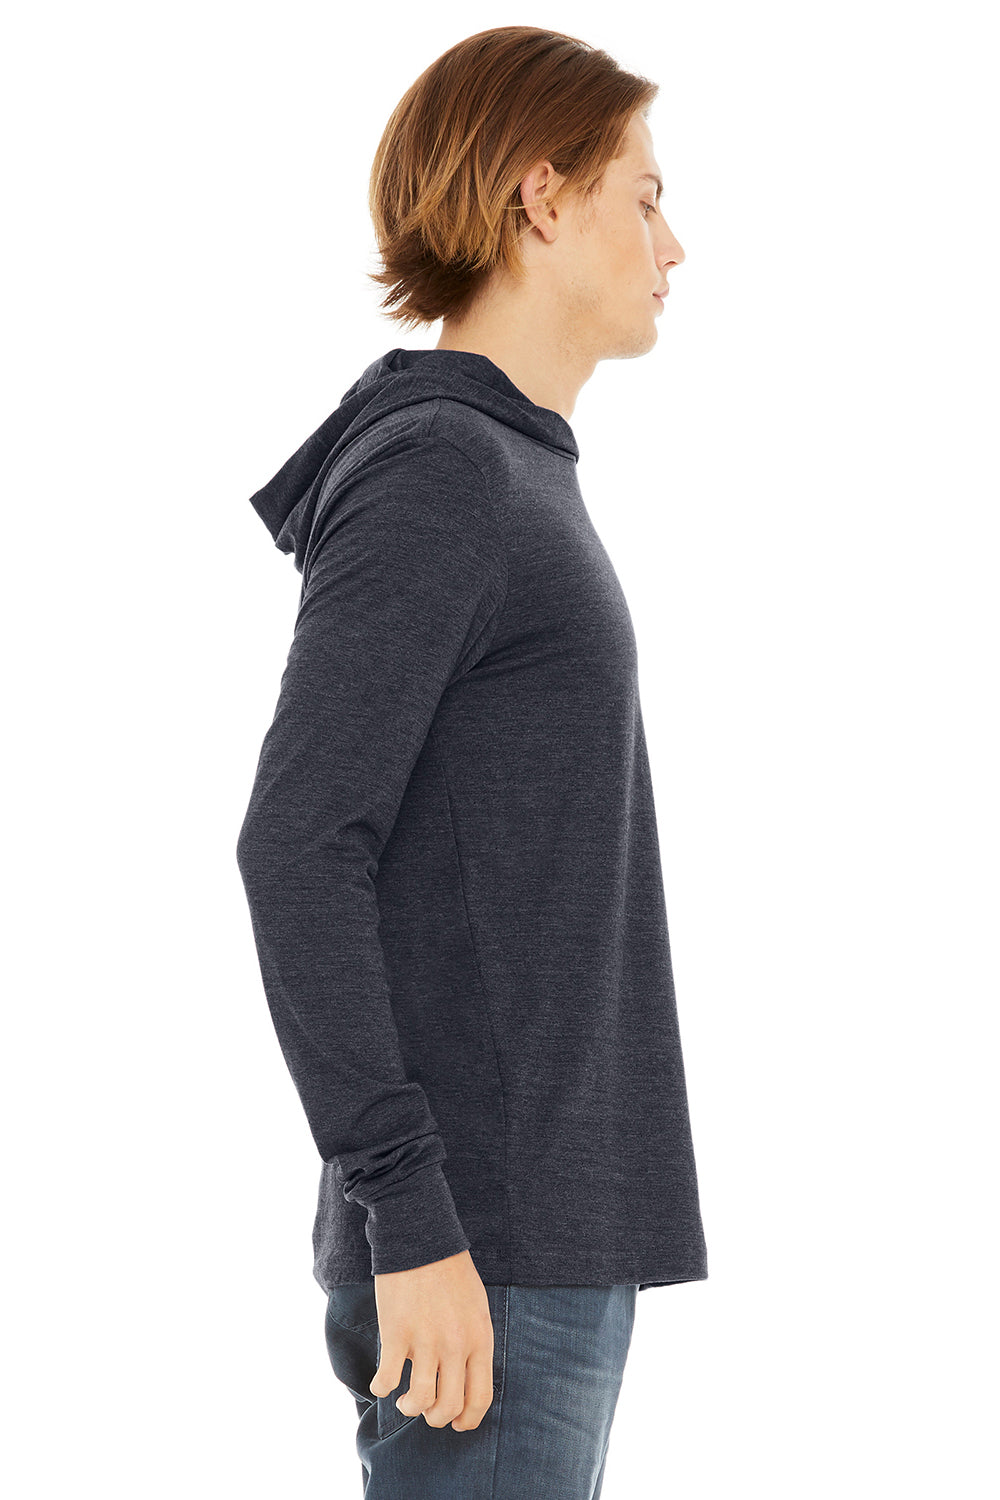 Bella + Canvas BC3512/3512 Mens Jersey Long Sleeve Hooded T-Shirt Hoodie Heather Navy Blue Model Side